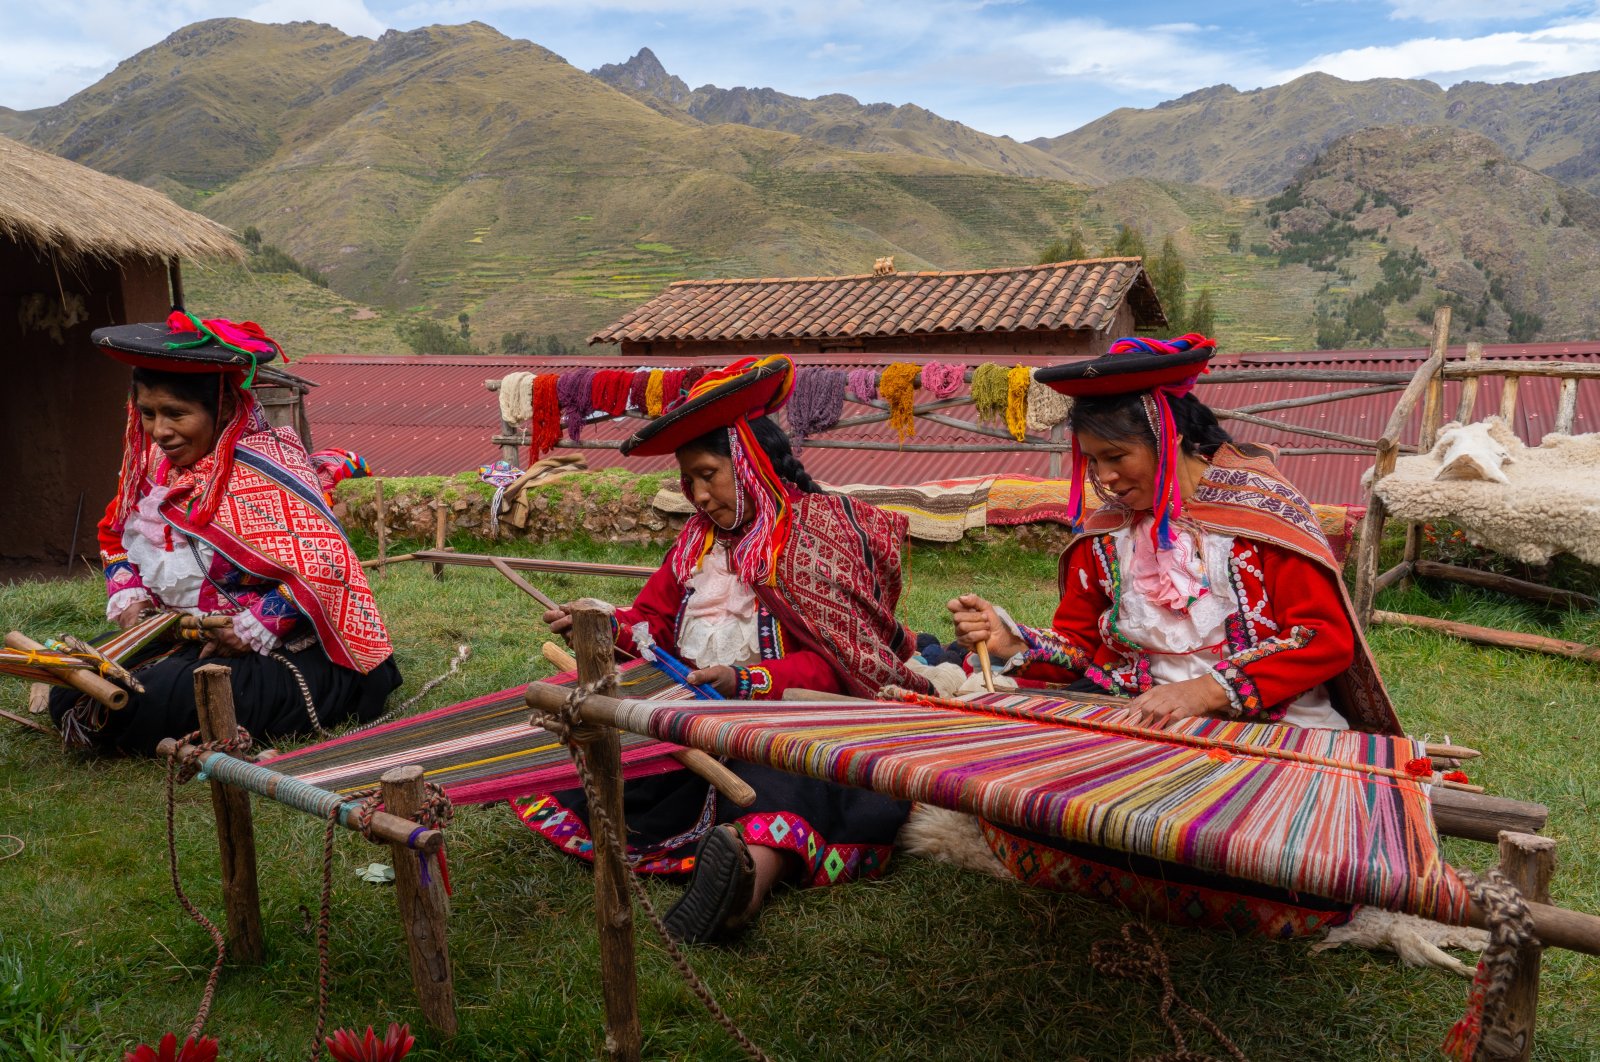 Three local female weavers, in colorful traditional local dress including festooned hats, weave colorful alpaca wool, Peru. (Getty Images Photo)